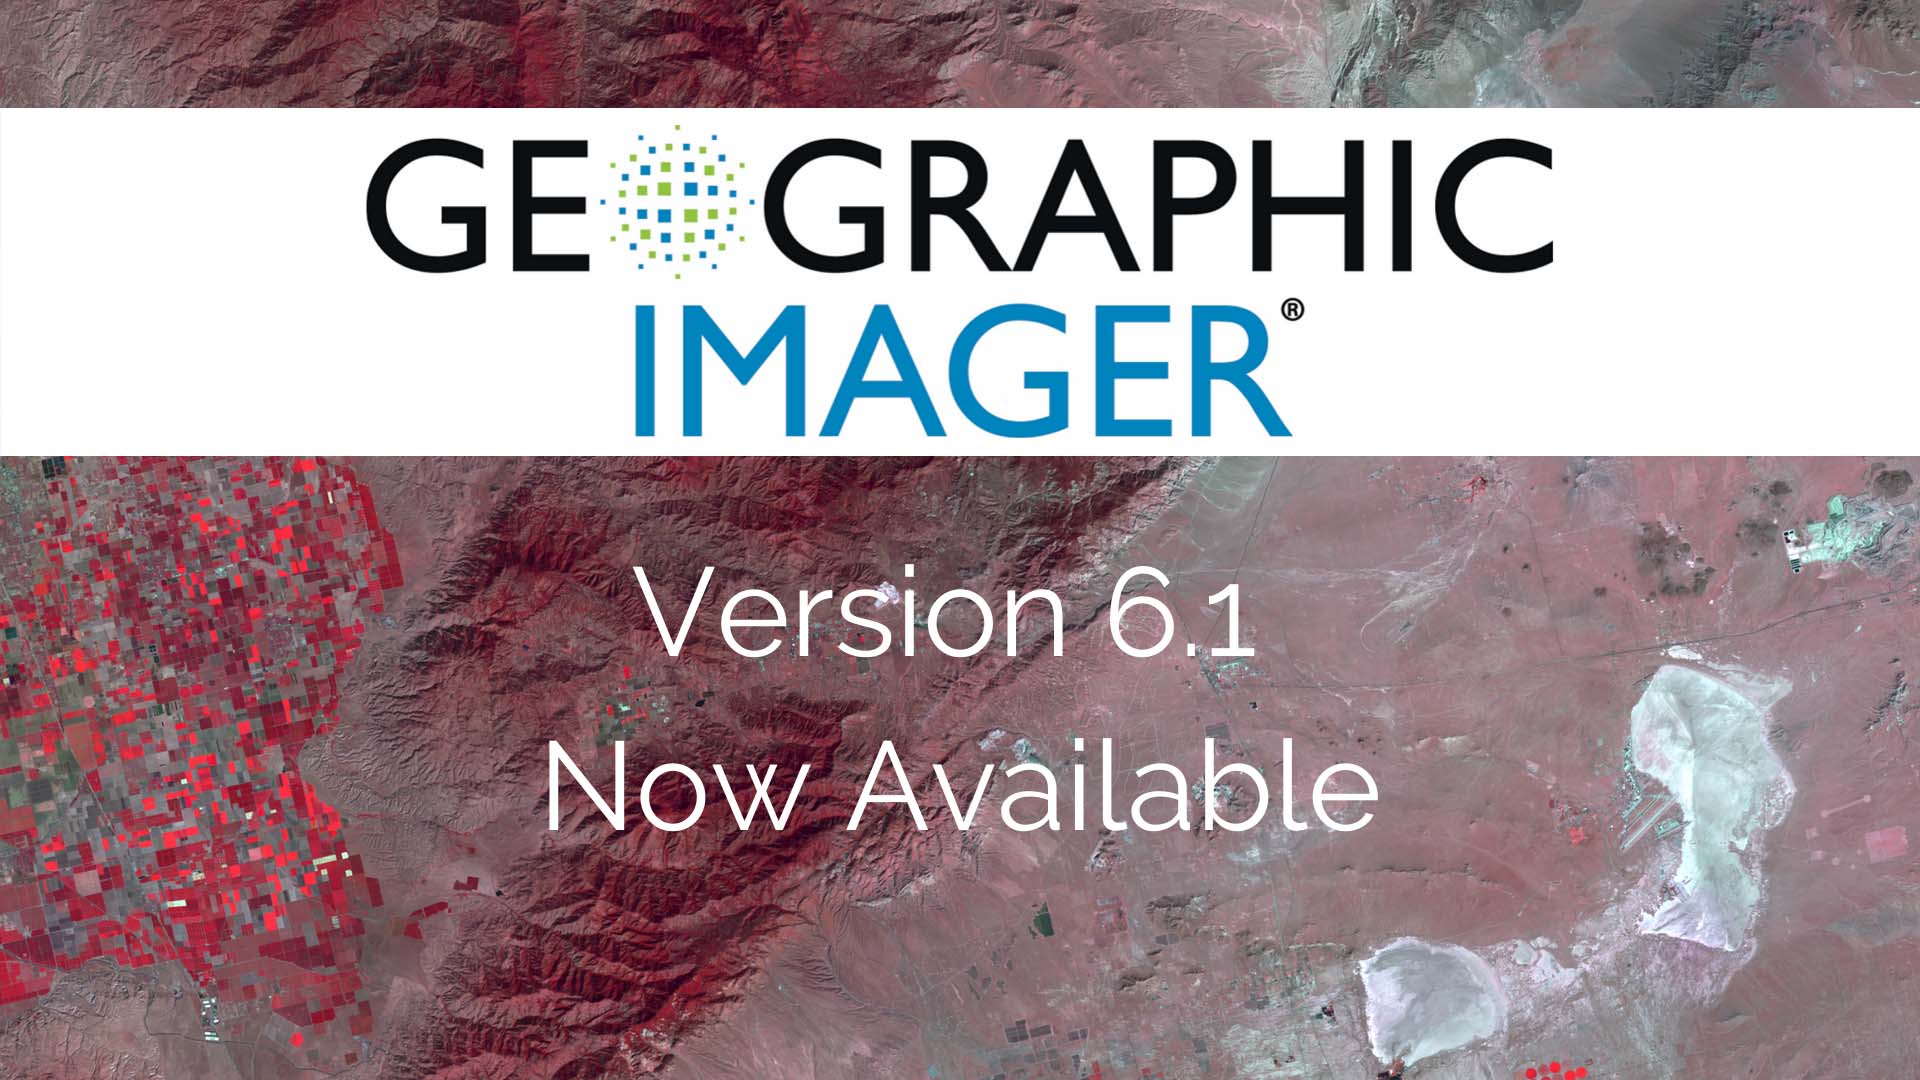 Geographic Imager 6.1 is here